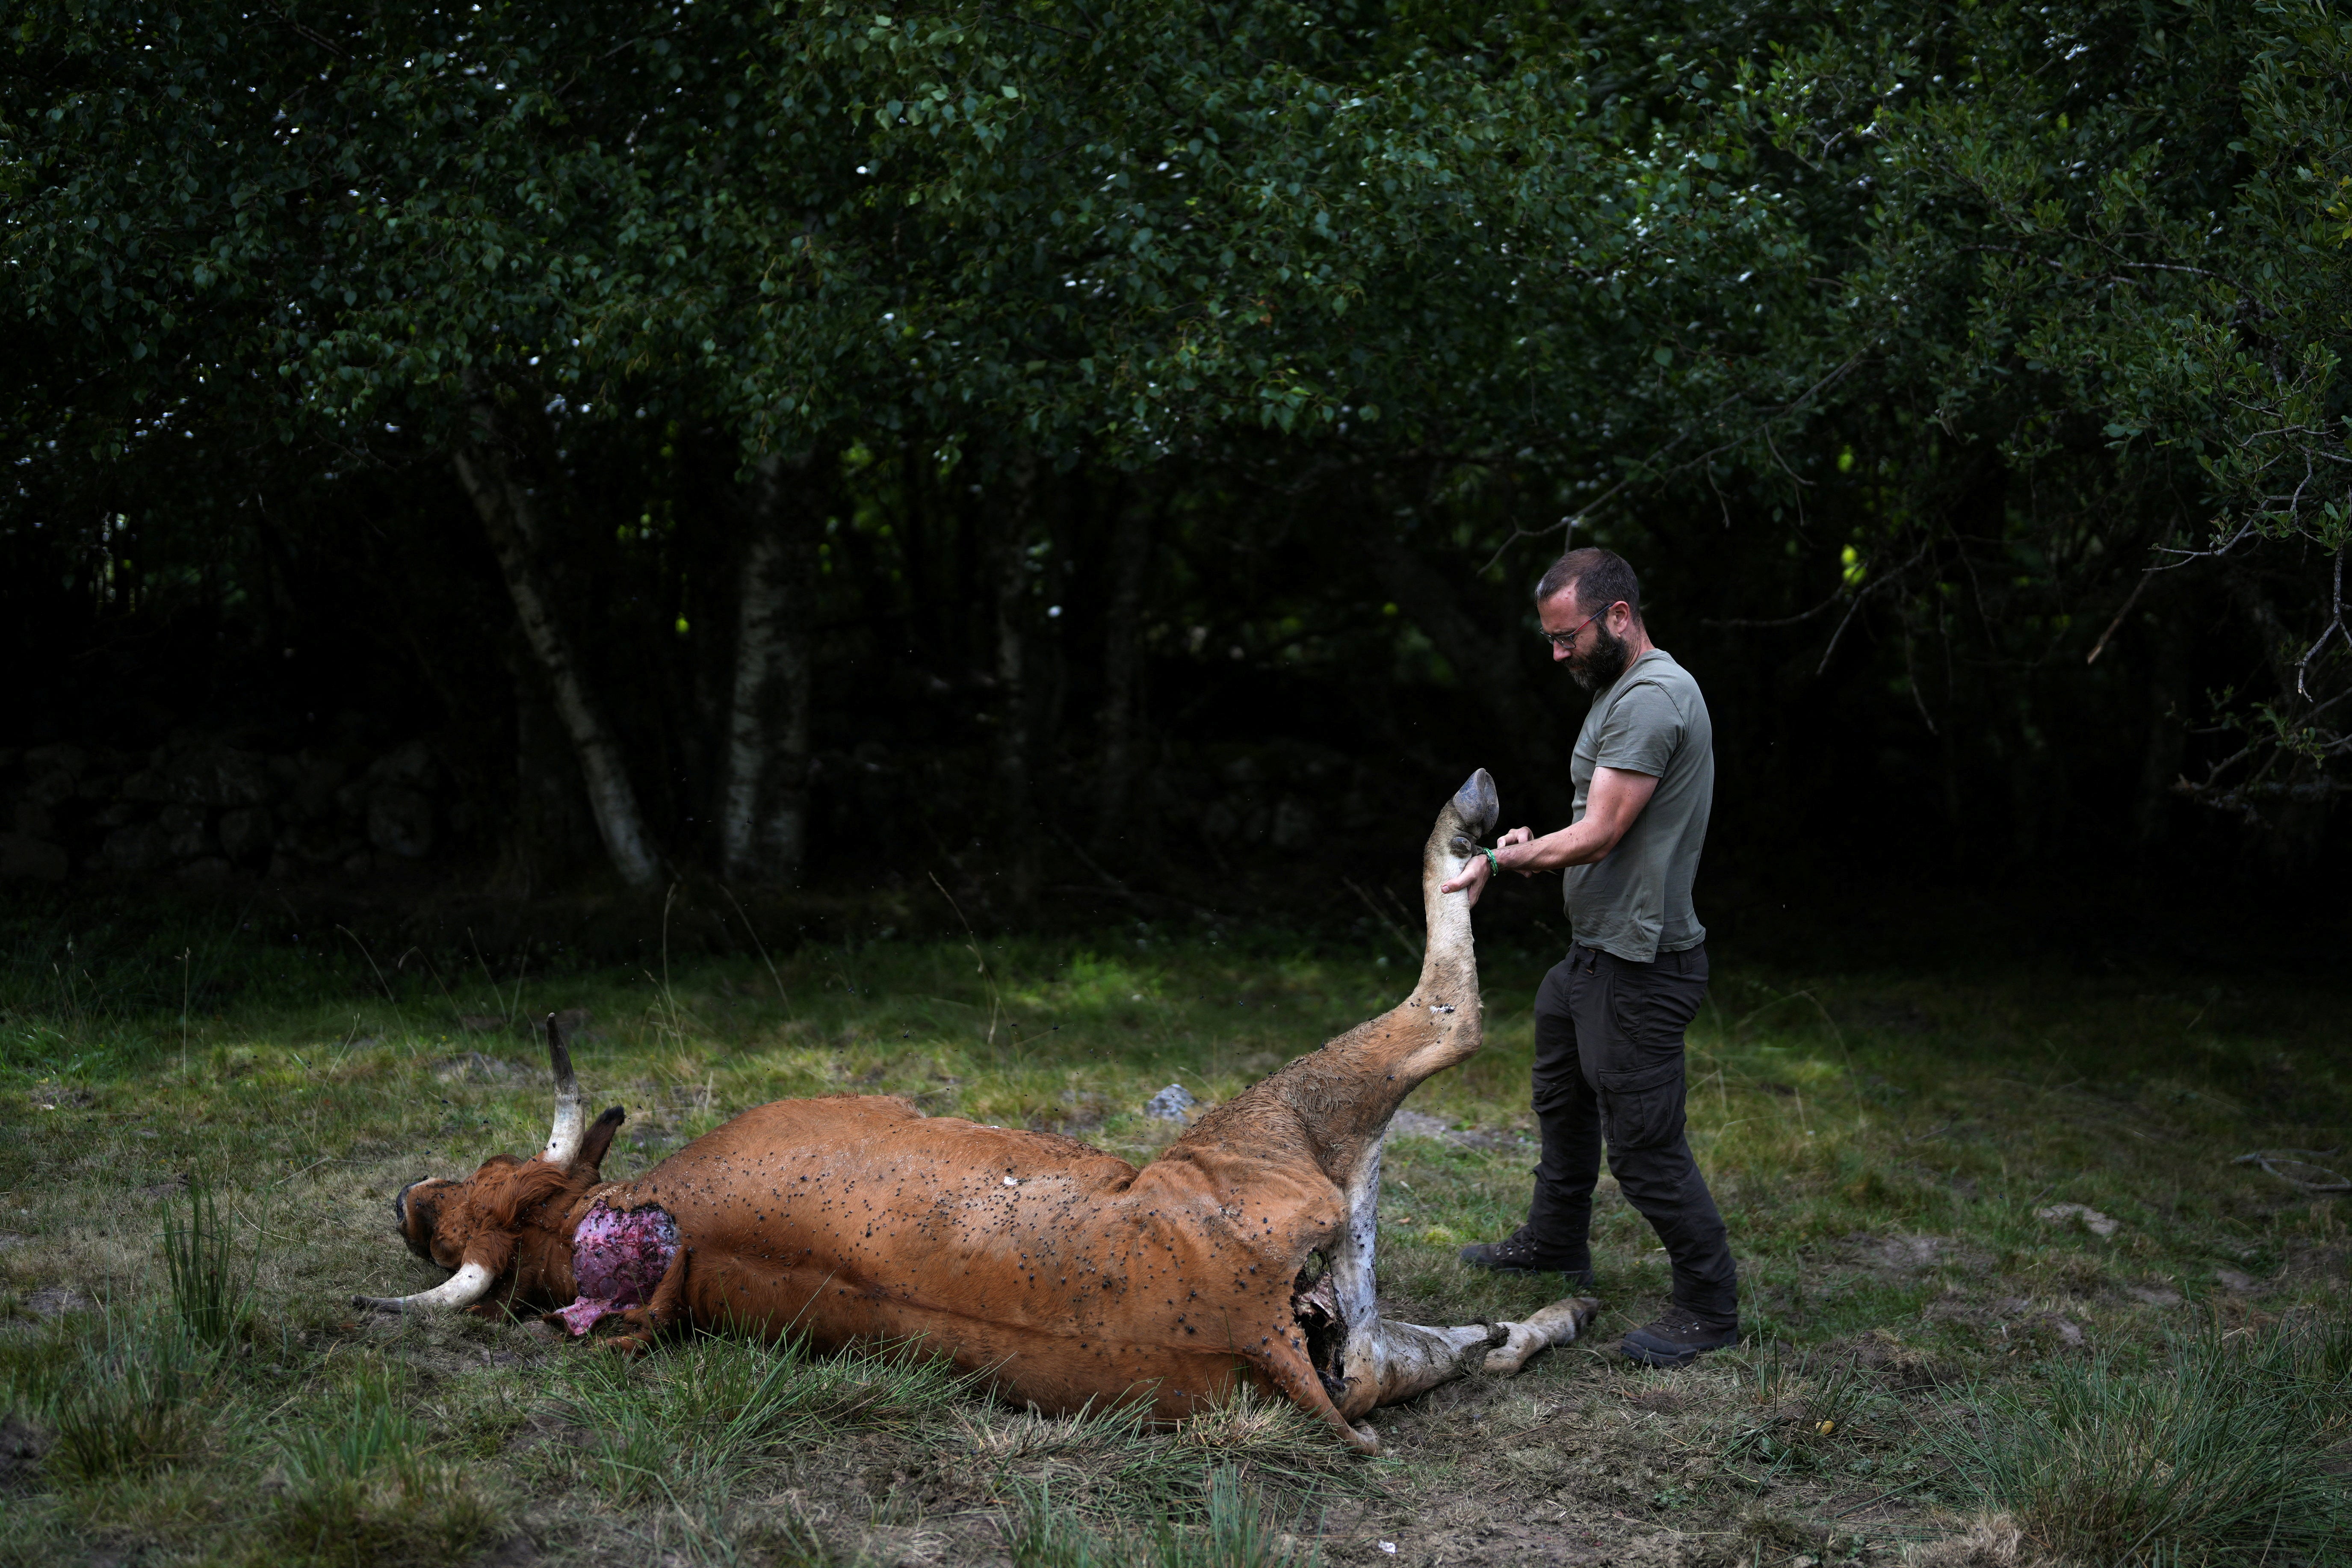 Daniel Pinto, operational manager of a special patrol monitoring Iberian brown bears, examines the body of a dead cow, which he determined hadn't been killed by a bear, in Salientes, Spain